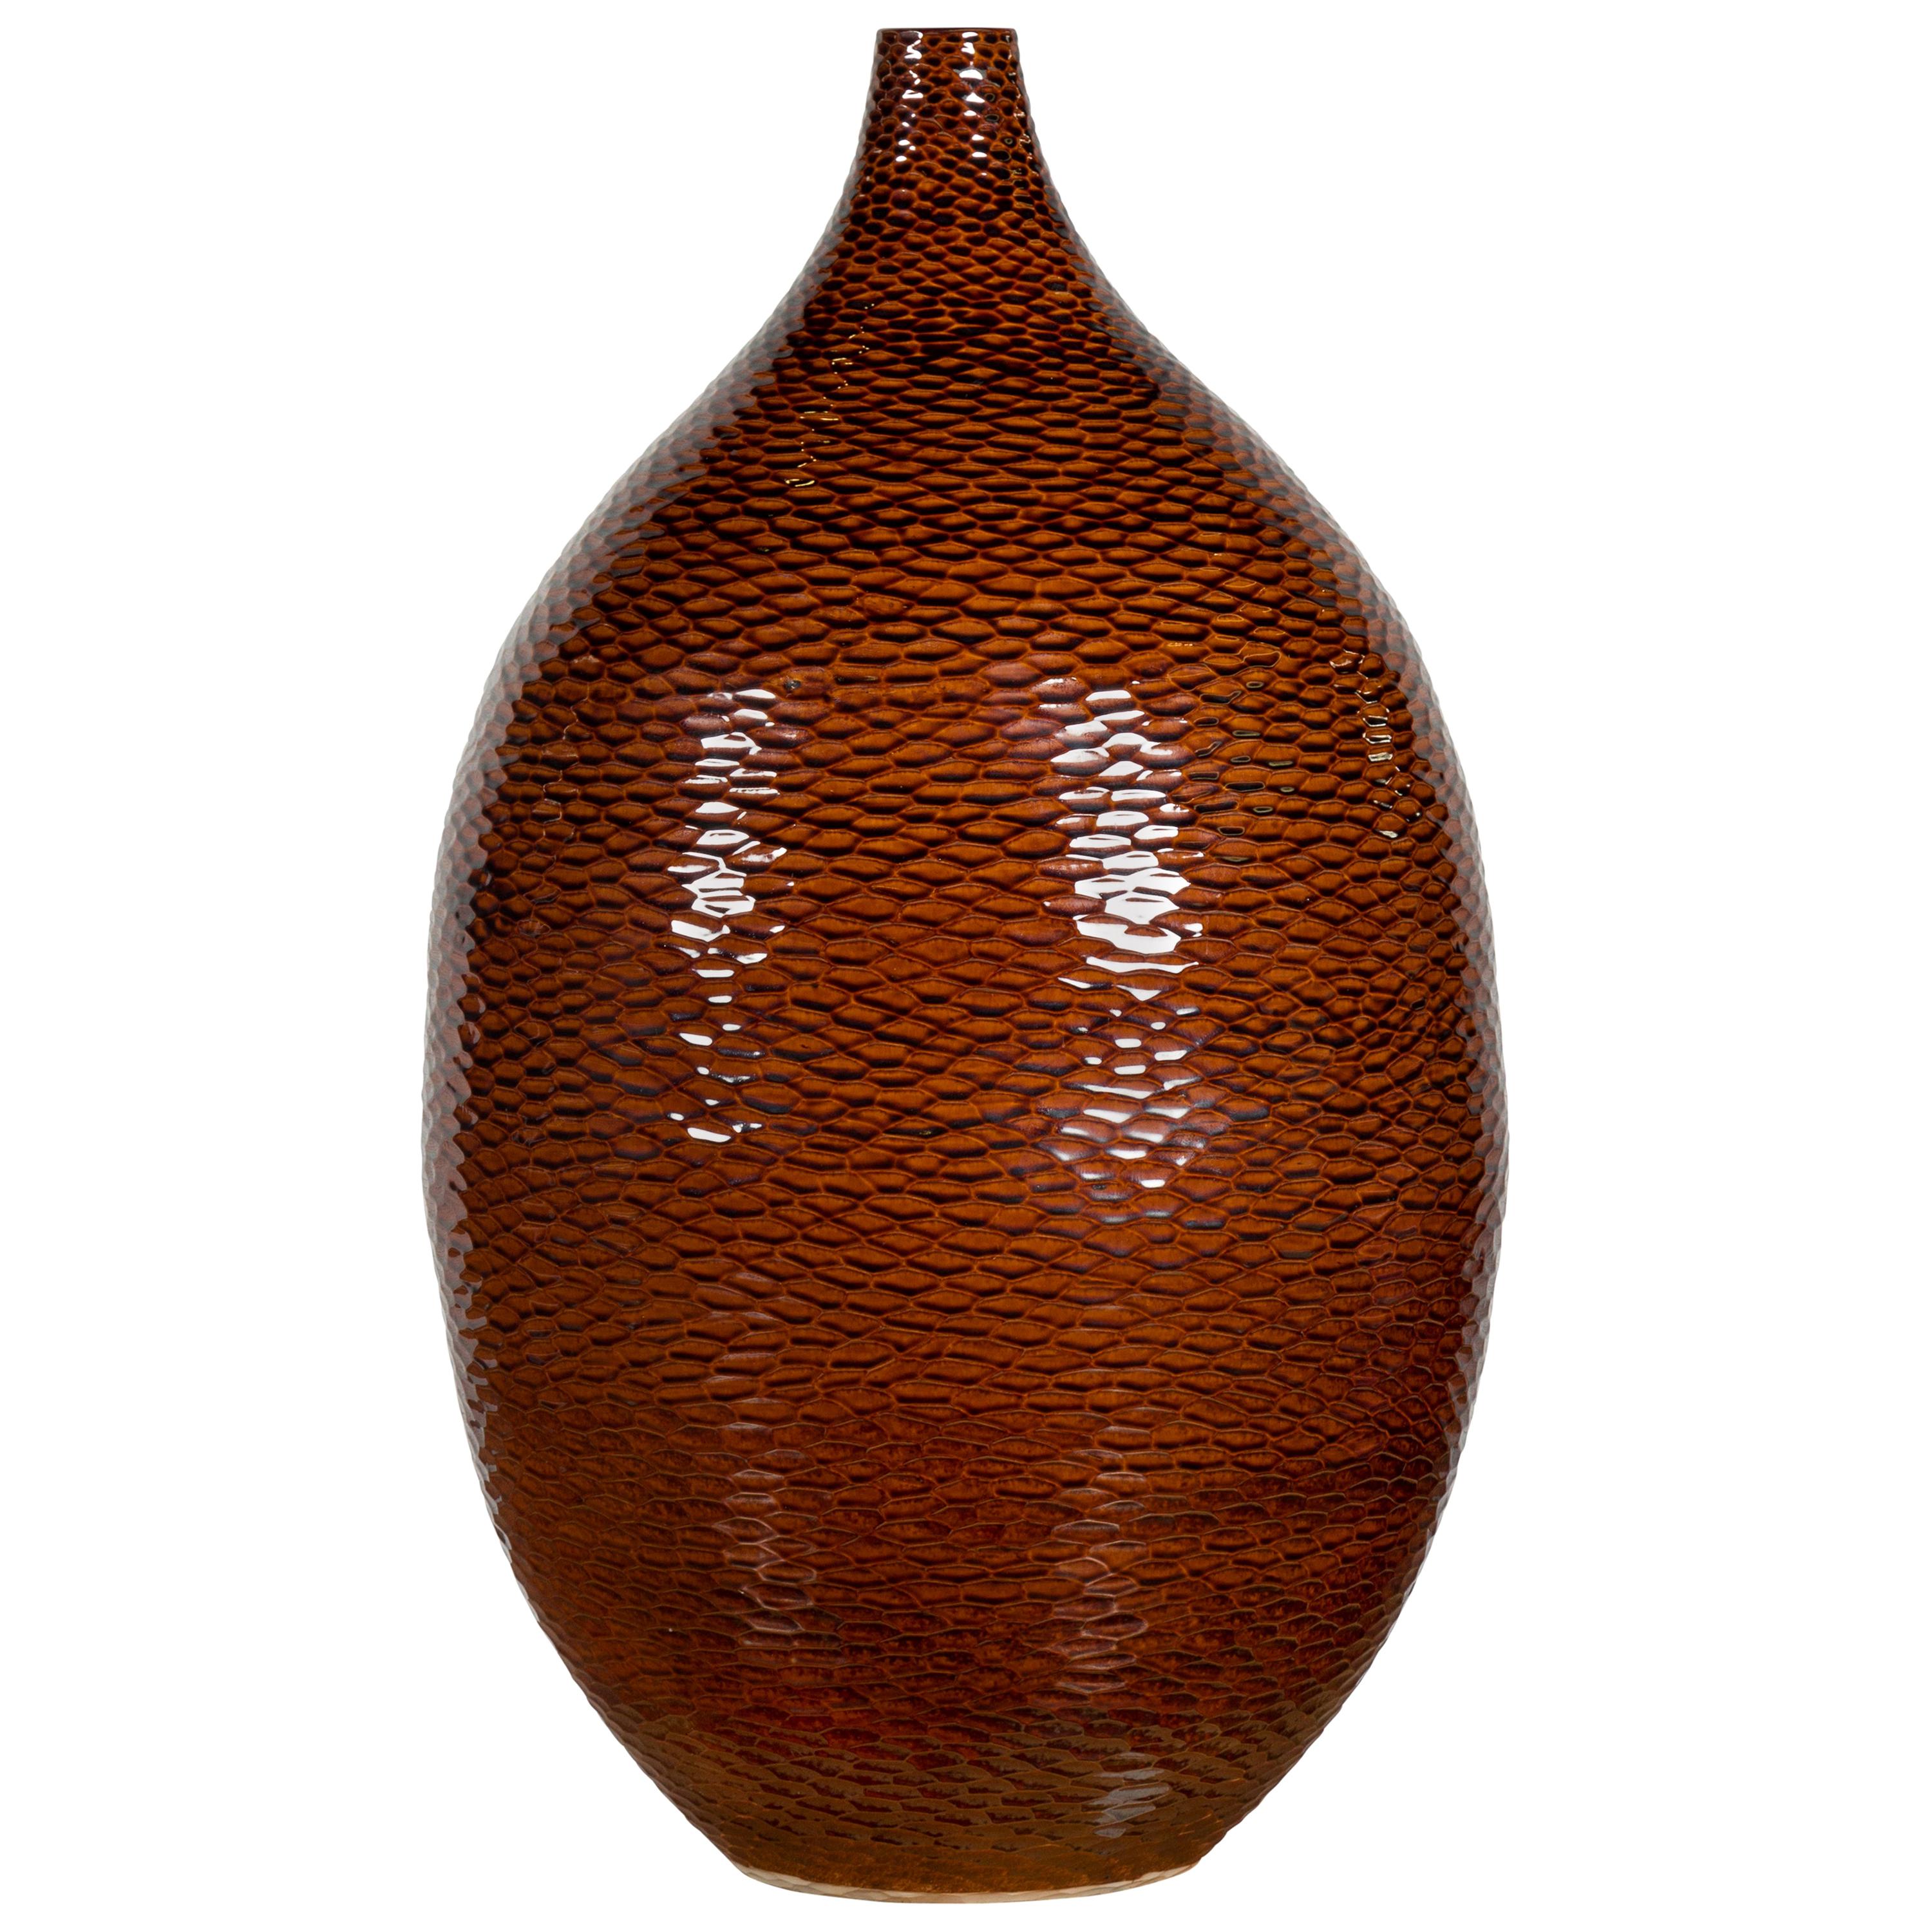 Thai Chiang Mai Brown Textured Teardrop Shaped Vase from the Prem Collection For Sale